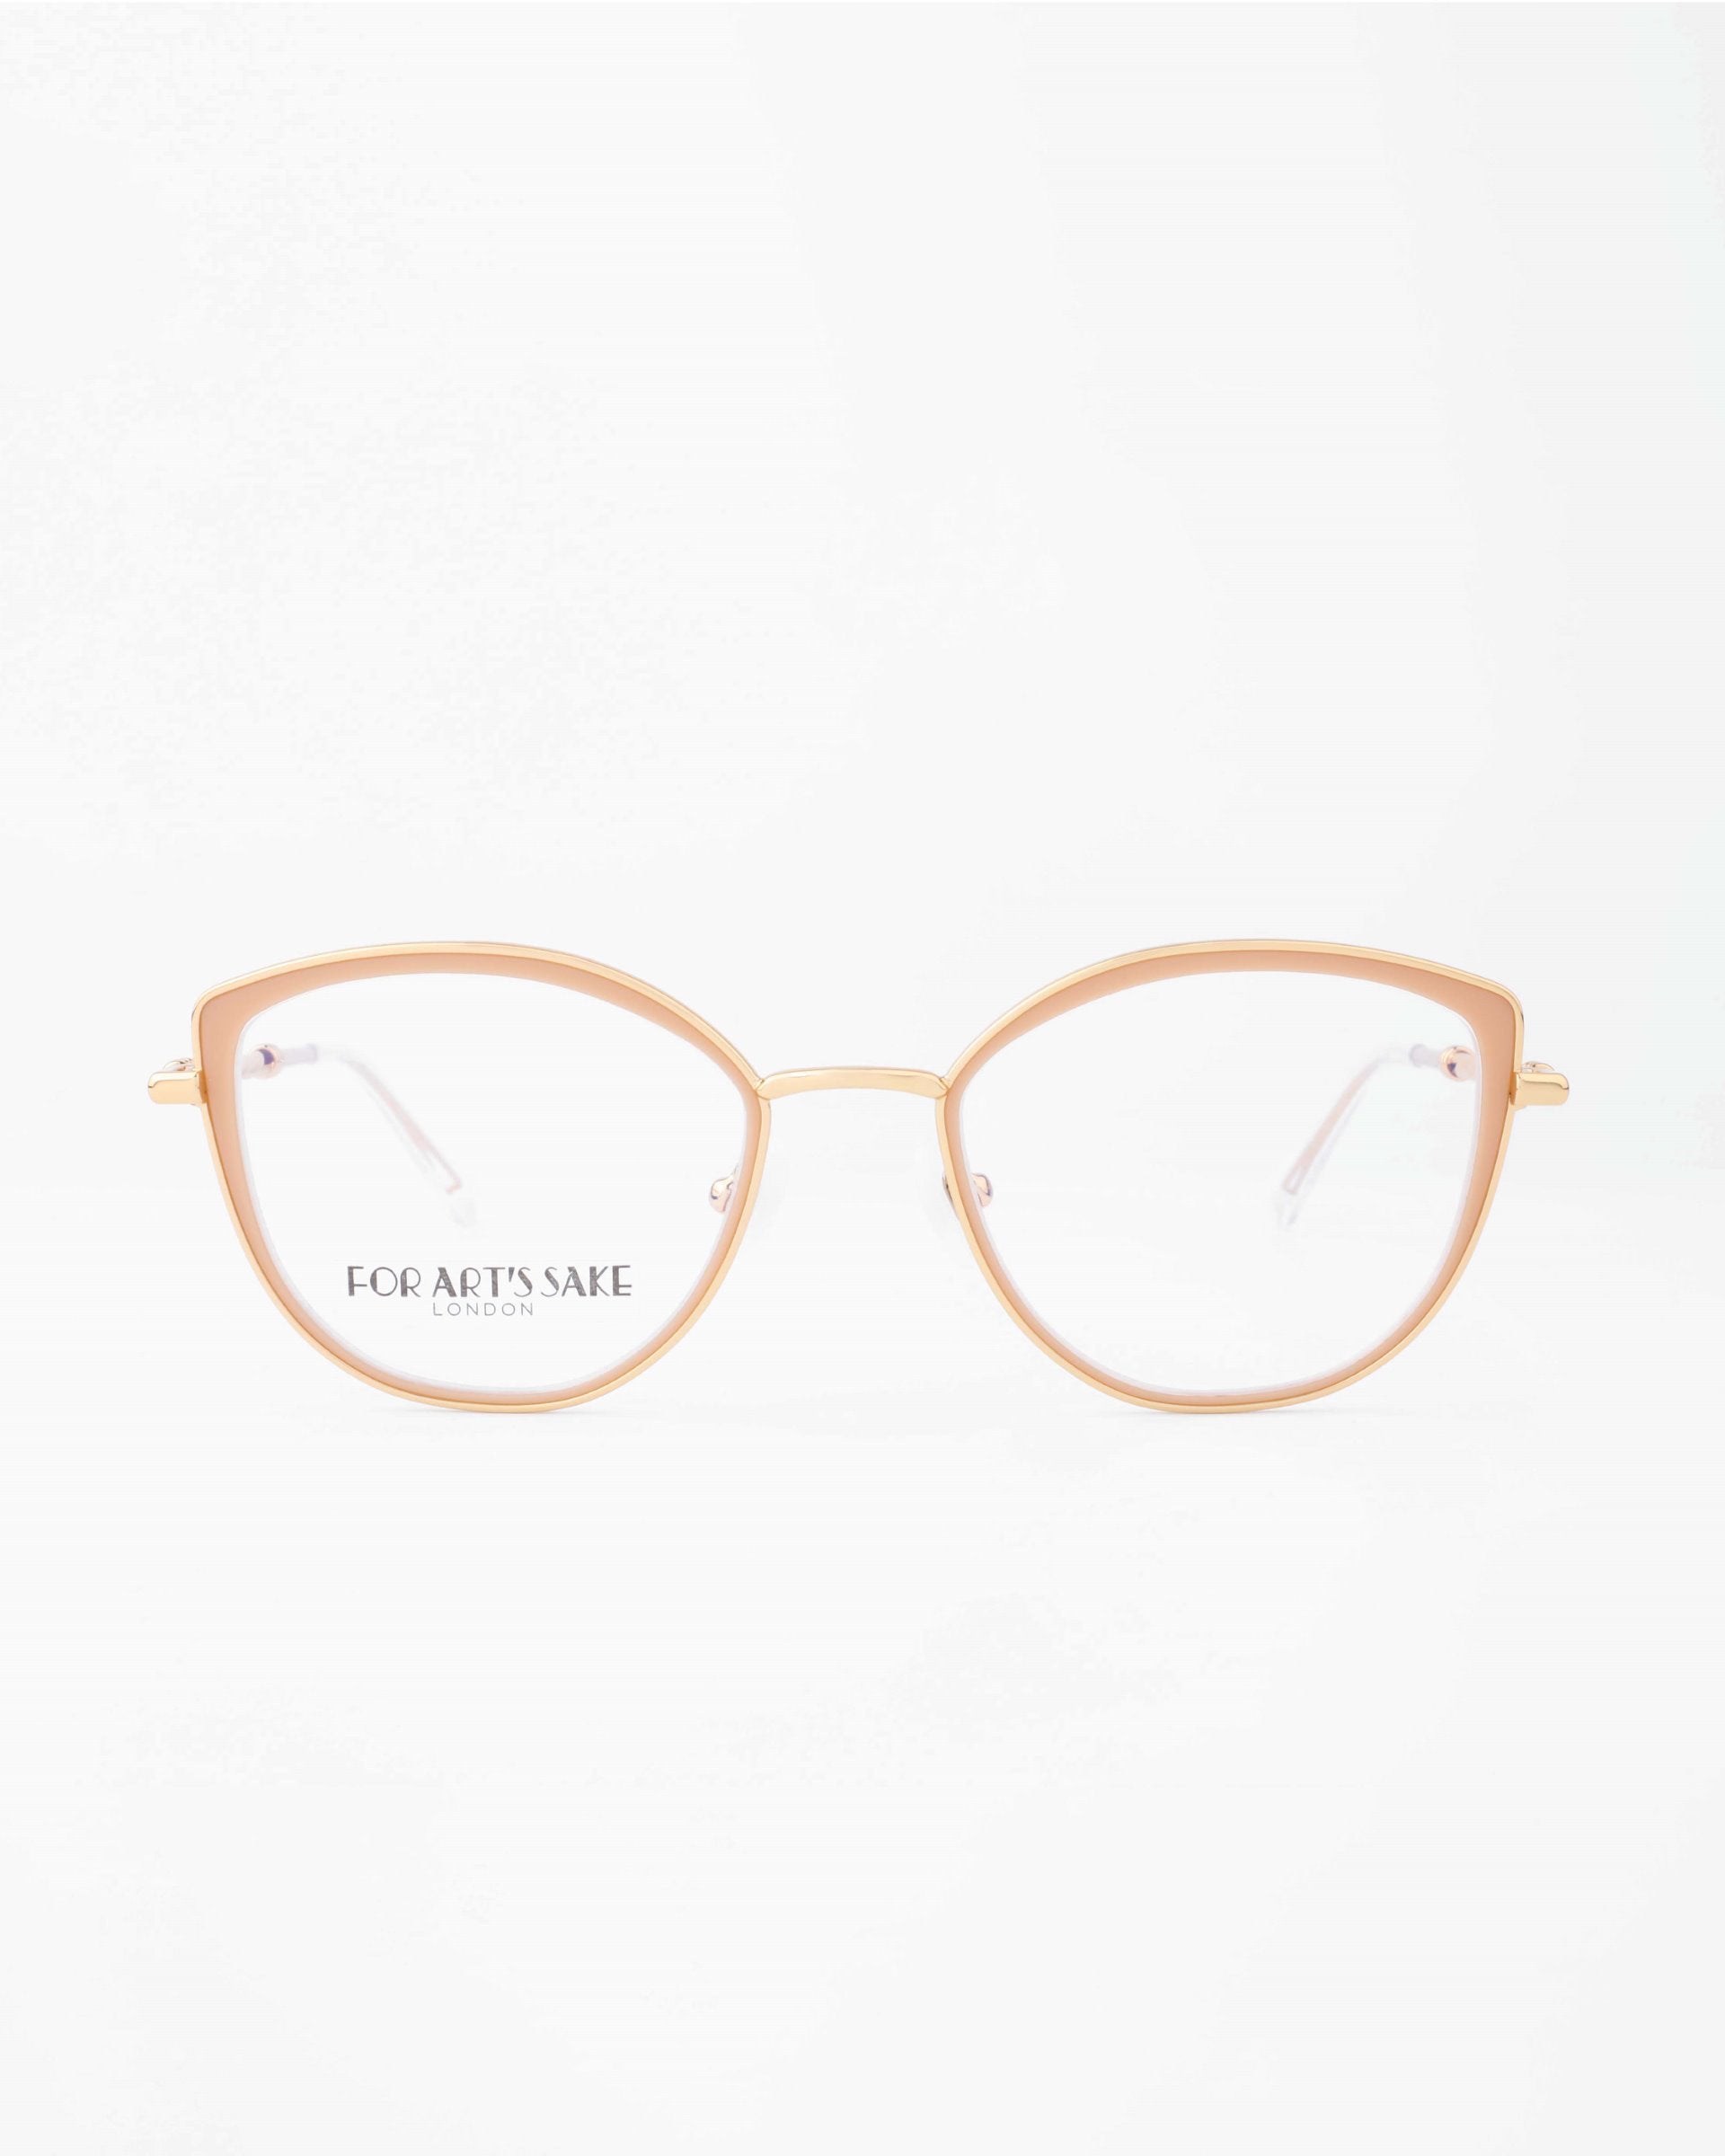 A pair of stylish For Art&#39;s Sake® Julie eyeglasses with light pink, thin frames. The lenses are large and round, featuring a subtle blue light filter and an inscription on the left lens that reads &quot;FOR ART&#39;S SAKE LONDON.&quot; The background is a plain, white surface.